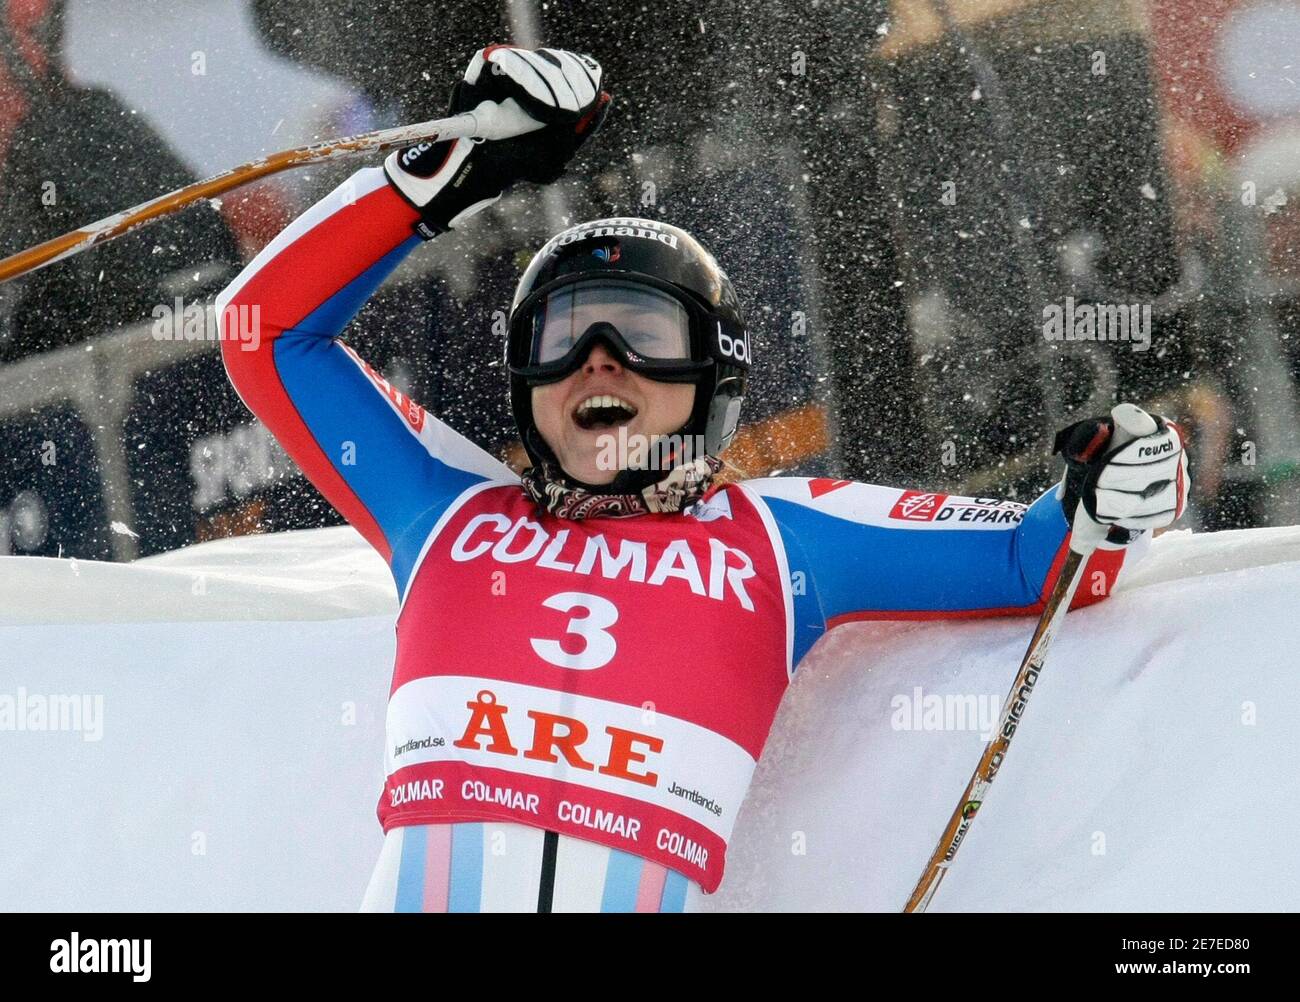 Tessa Worley of France celebrates after winning the women's giant slalom  World Cup race in the Swedish ski resort of Are December 12, 2009.  REUTERS/Leonhard Foeger (SWEDEN - Tags: SPORT SKIING Stock